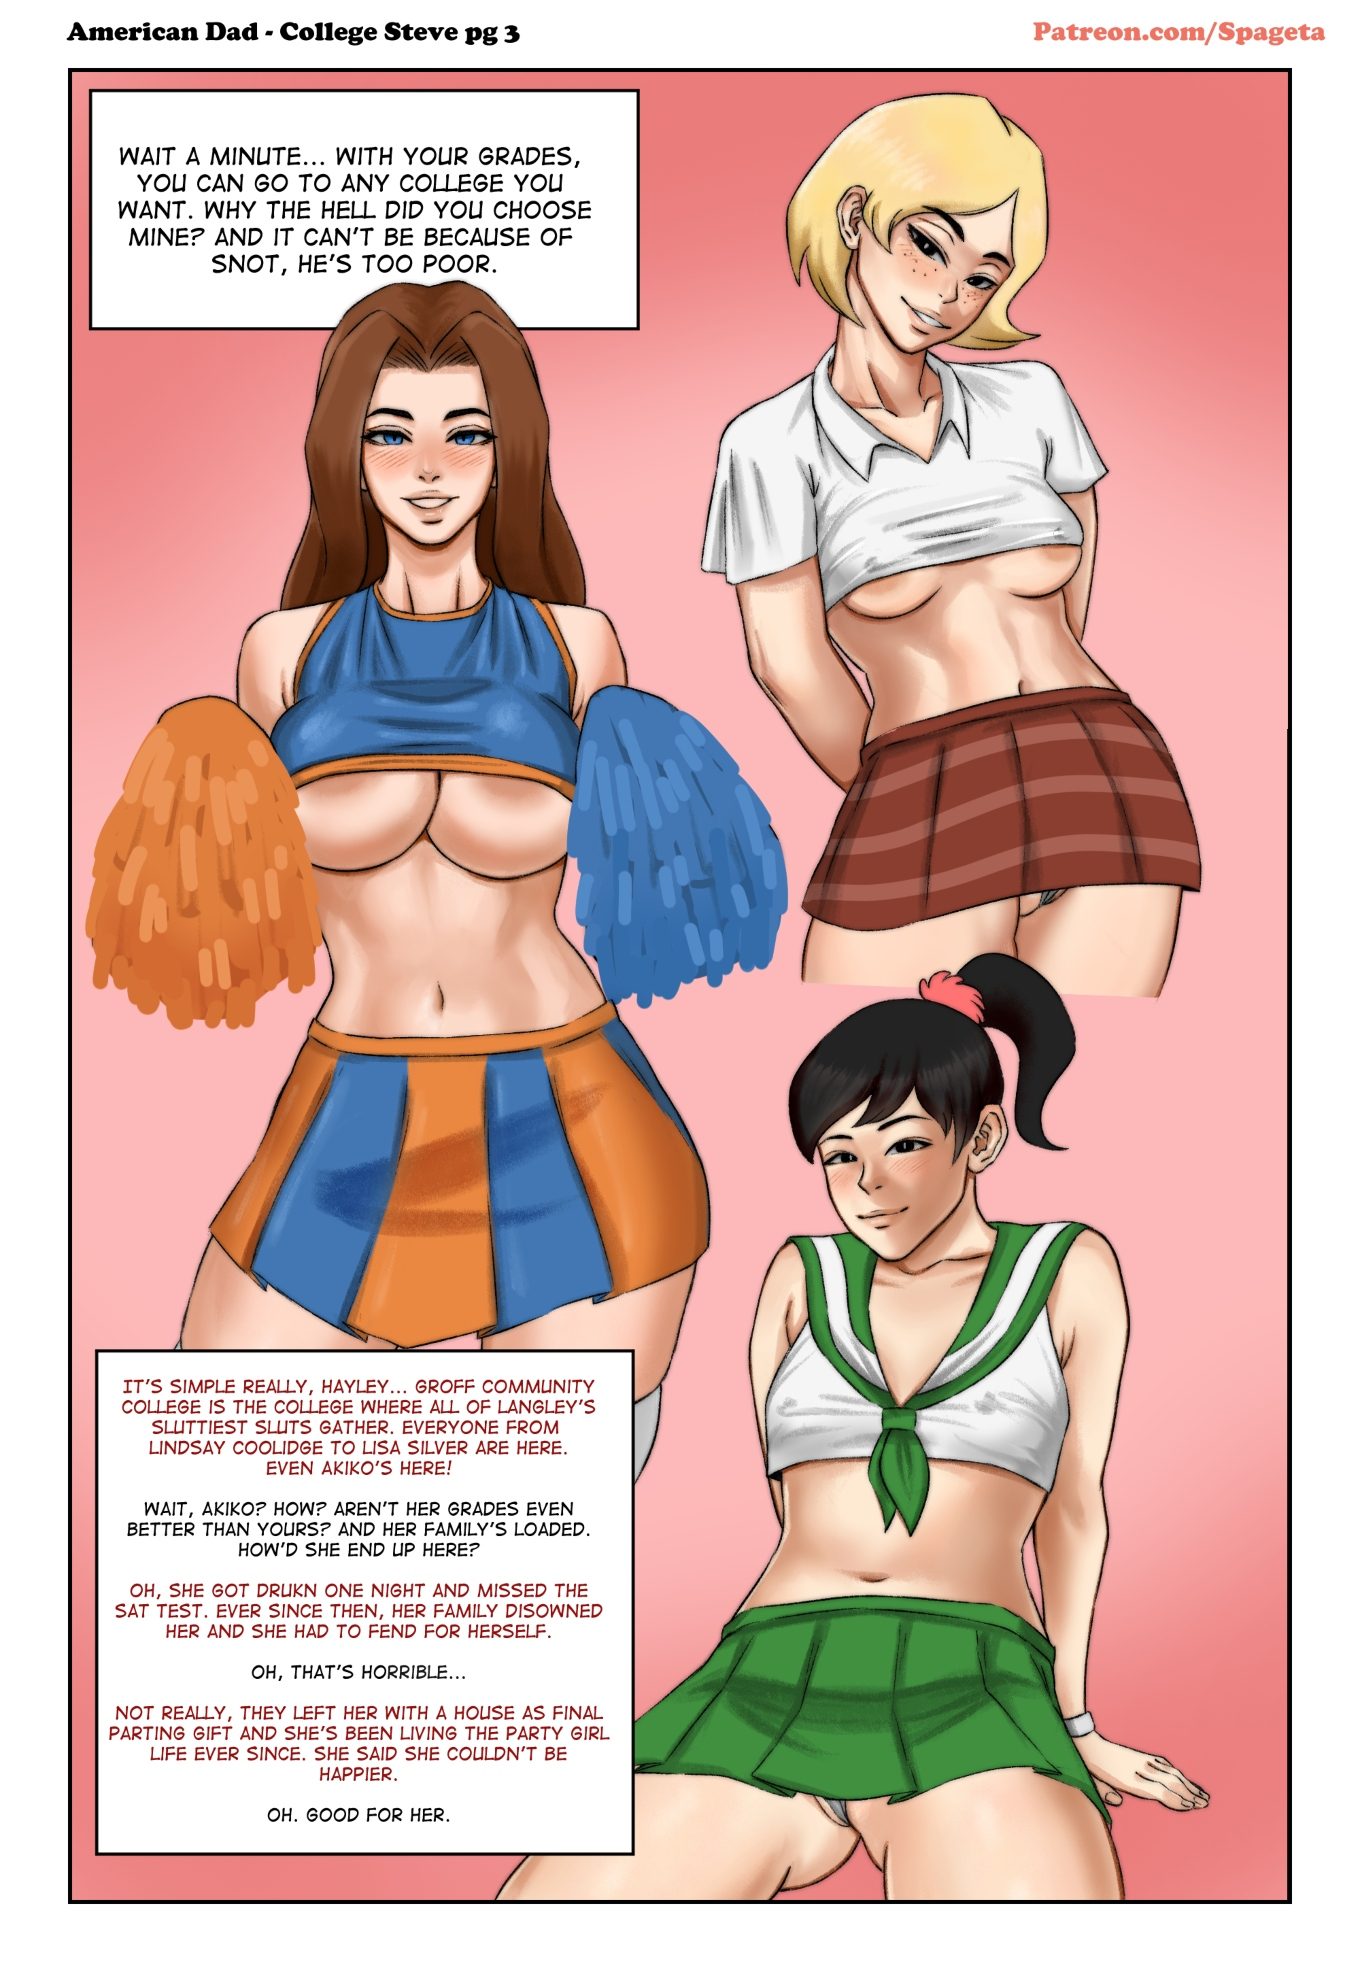 1360px x 1972px - College Steve - American Dad by Spageta - FreeAdultComix